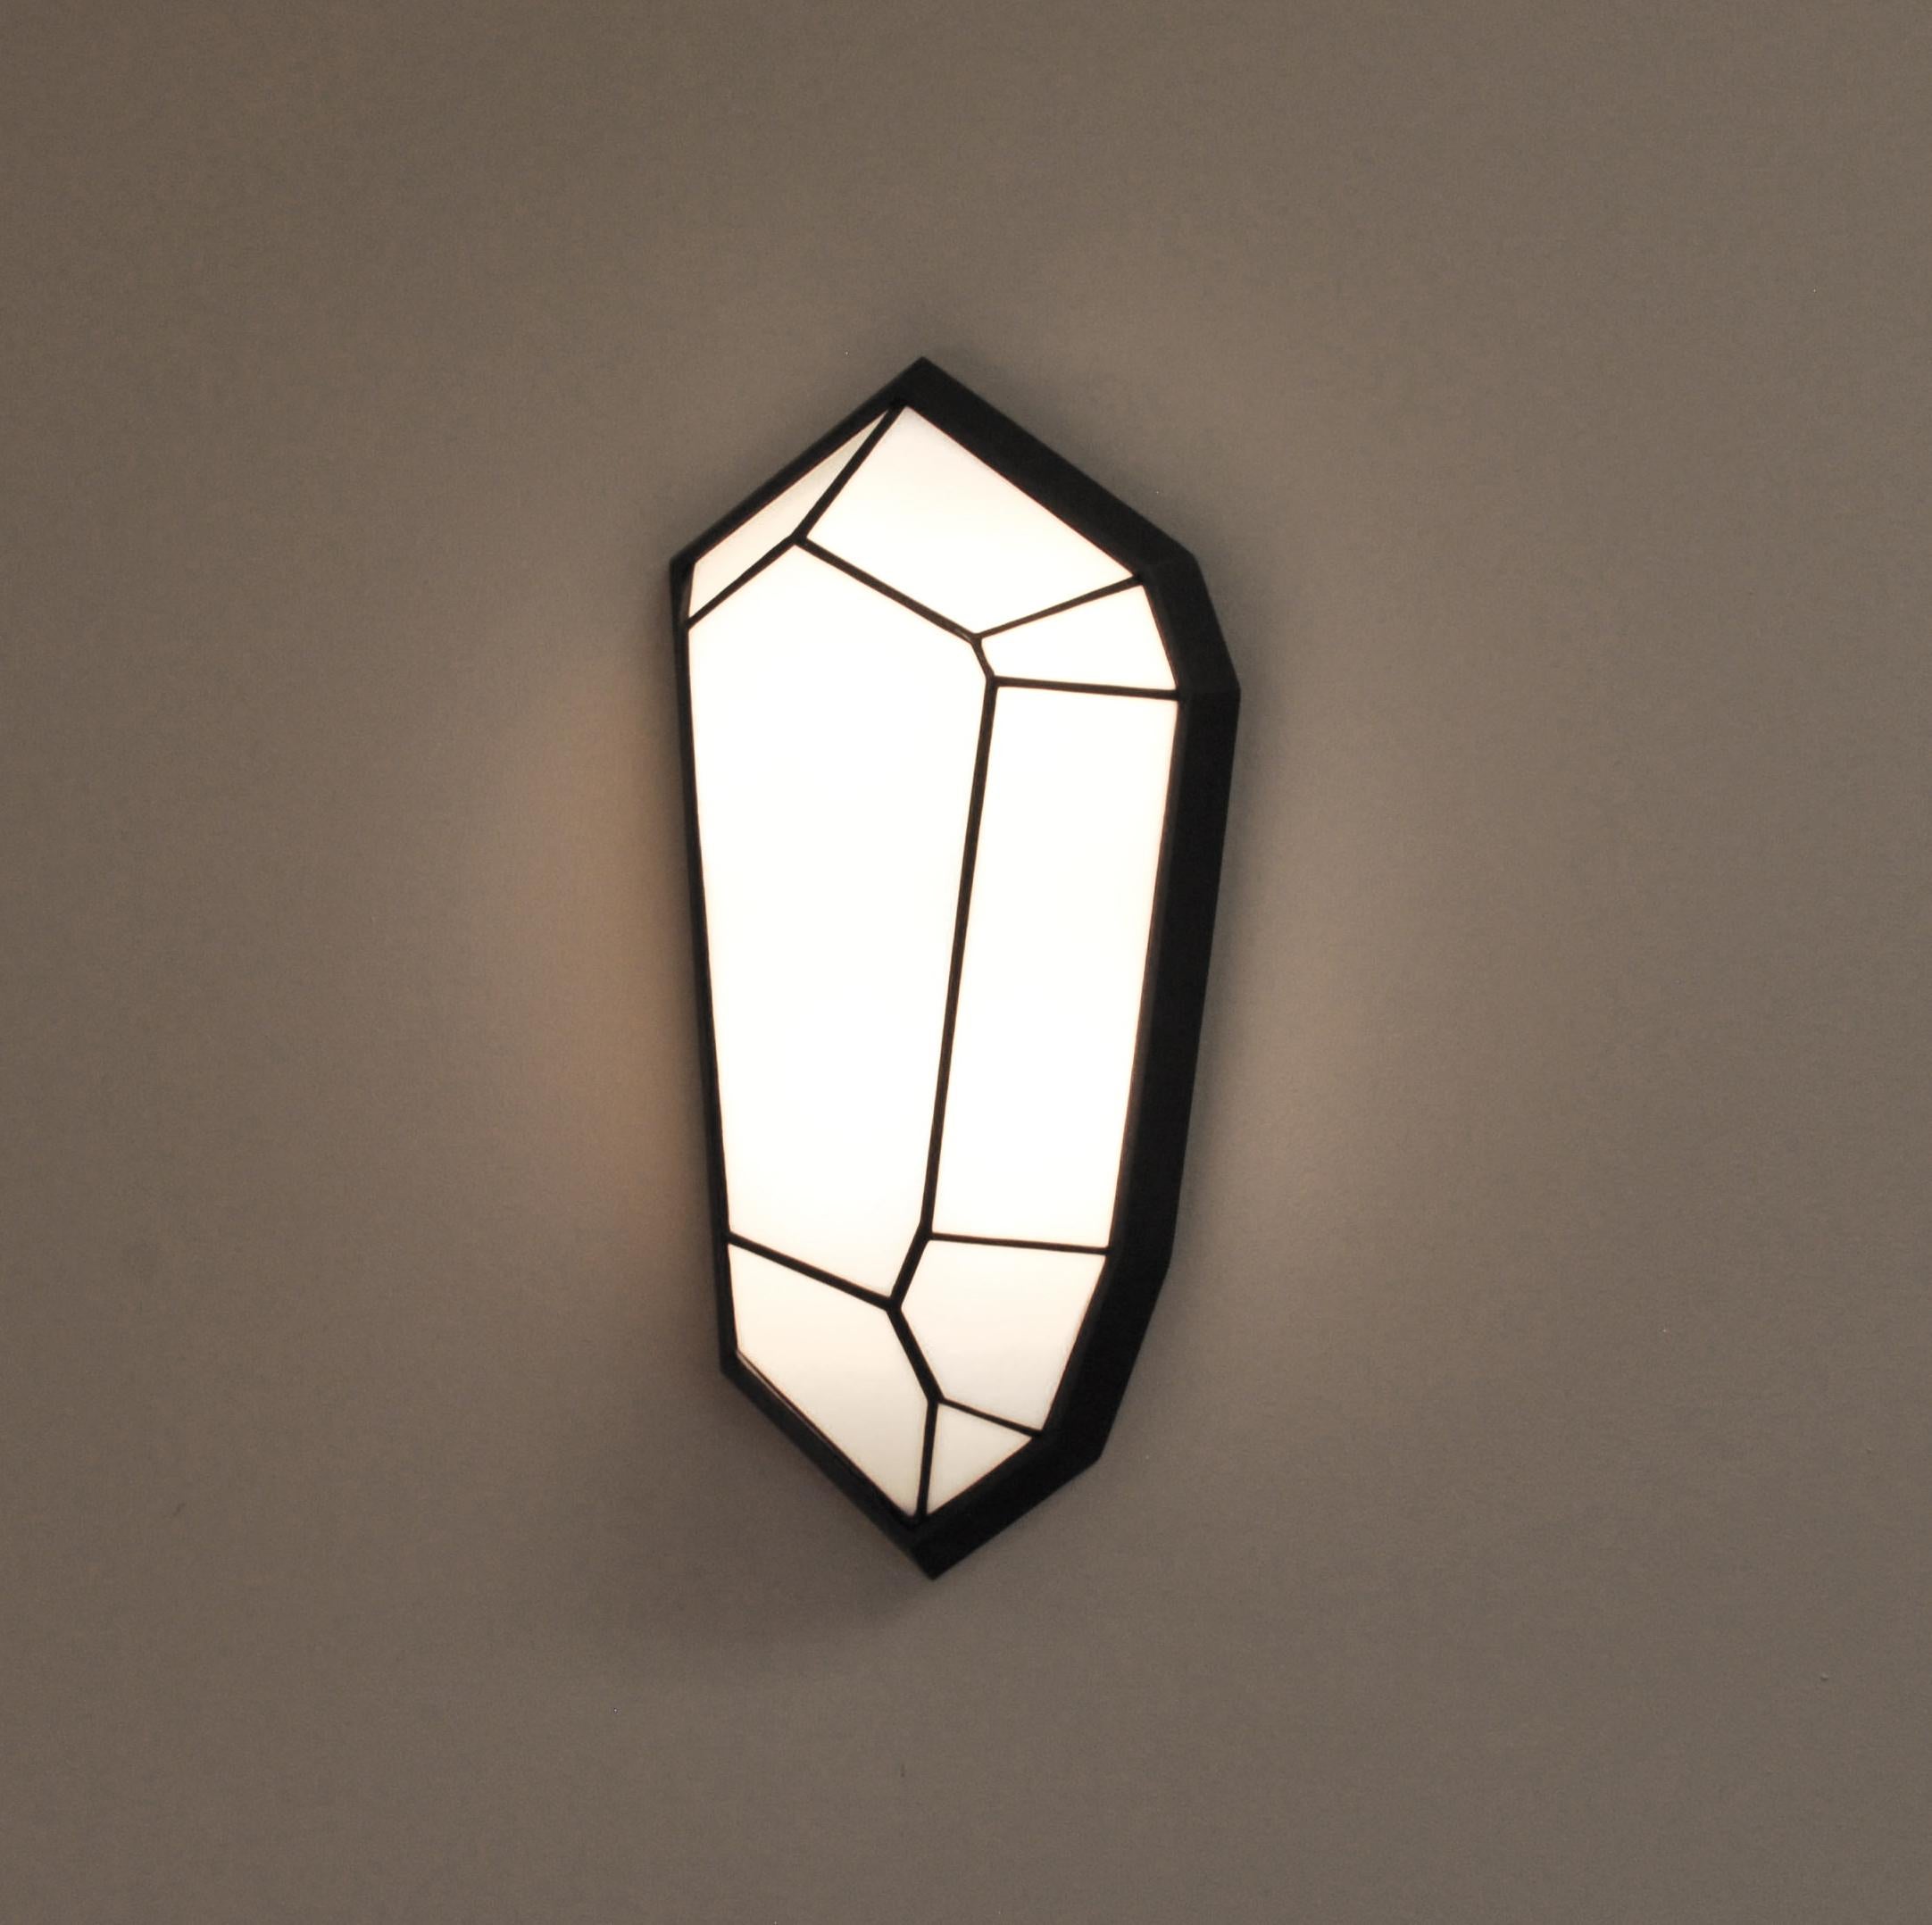 The Oracle sconce was inspired by raw quartz crystal formations. “The faceted surfaces of the crystals combine in such strong geometry while organic at the same time, I wanted to bring this feeling to a jewel for your home”- Samuel Hilliard 
Glass: